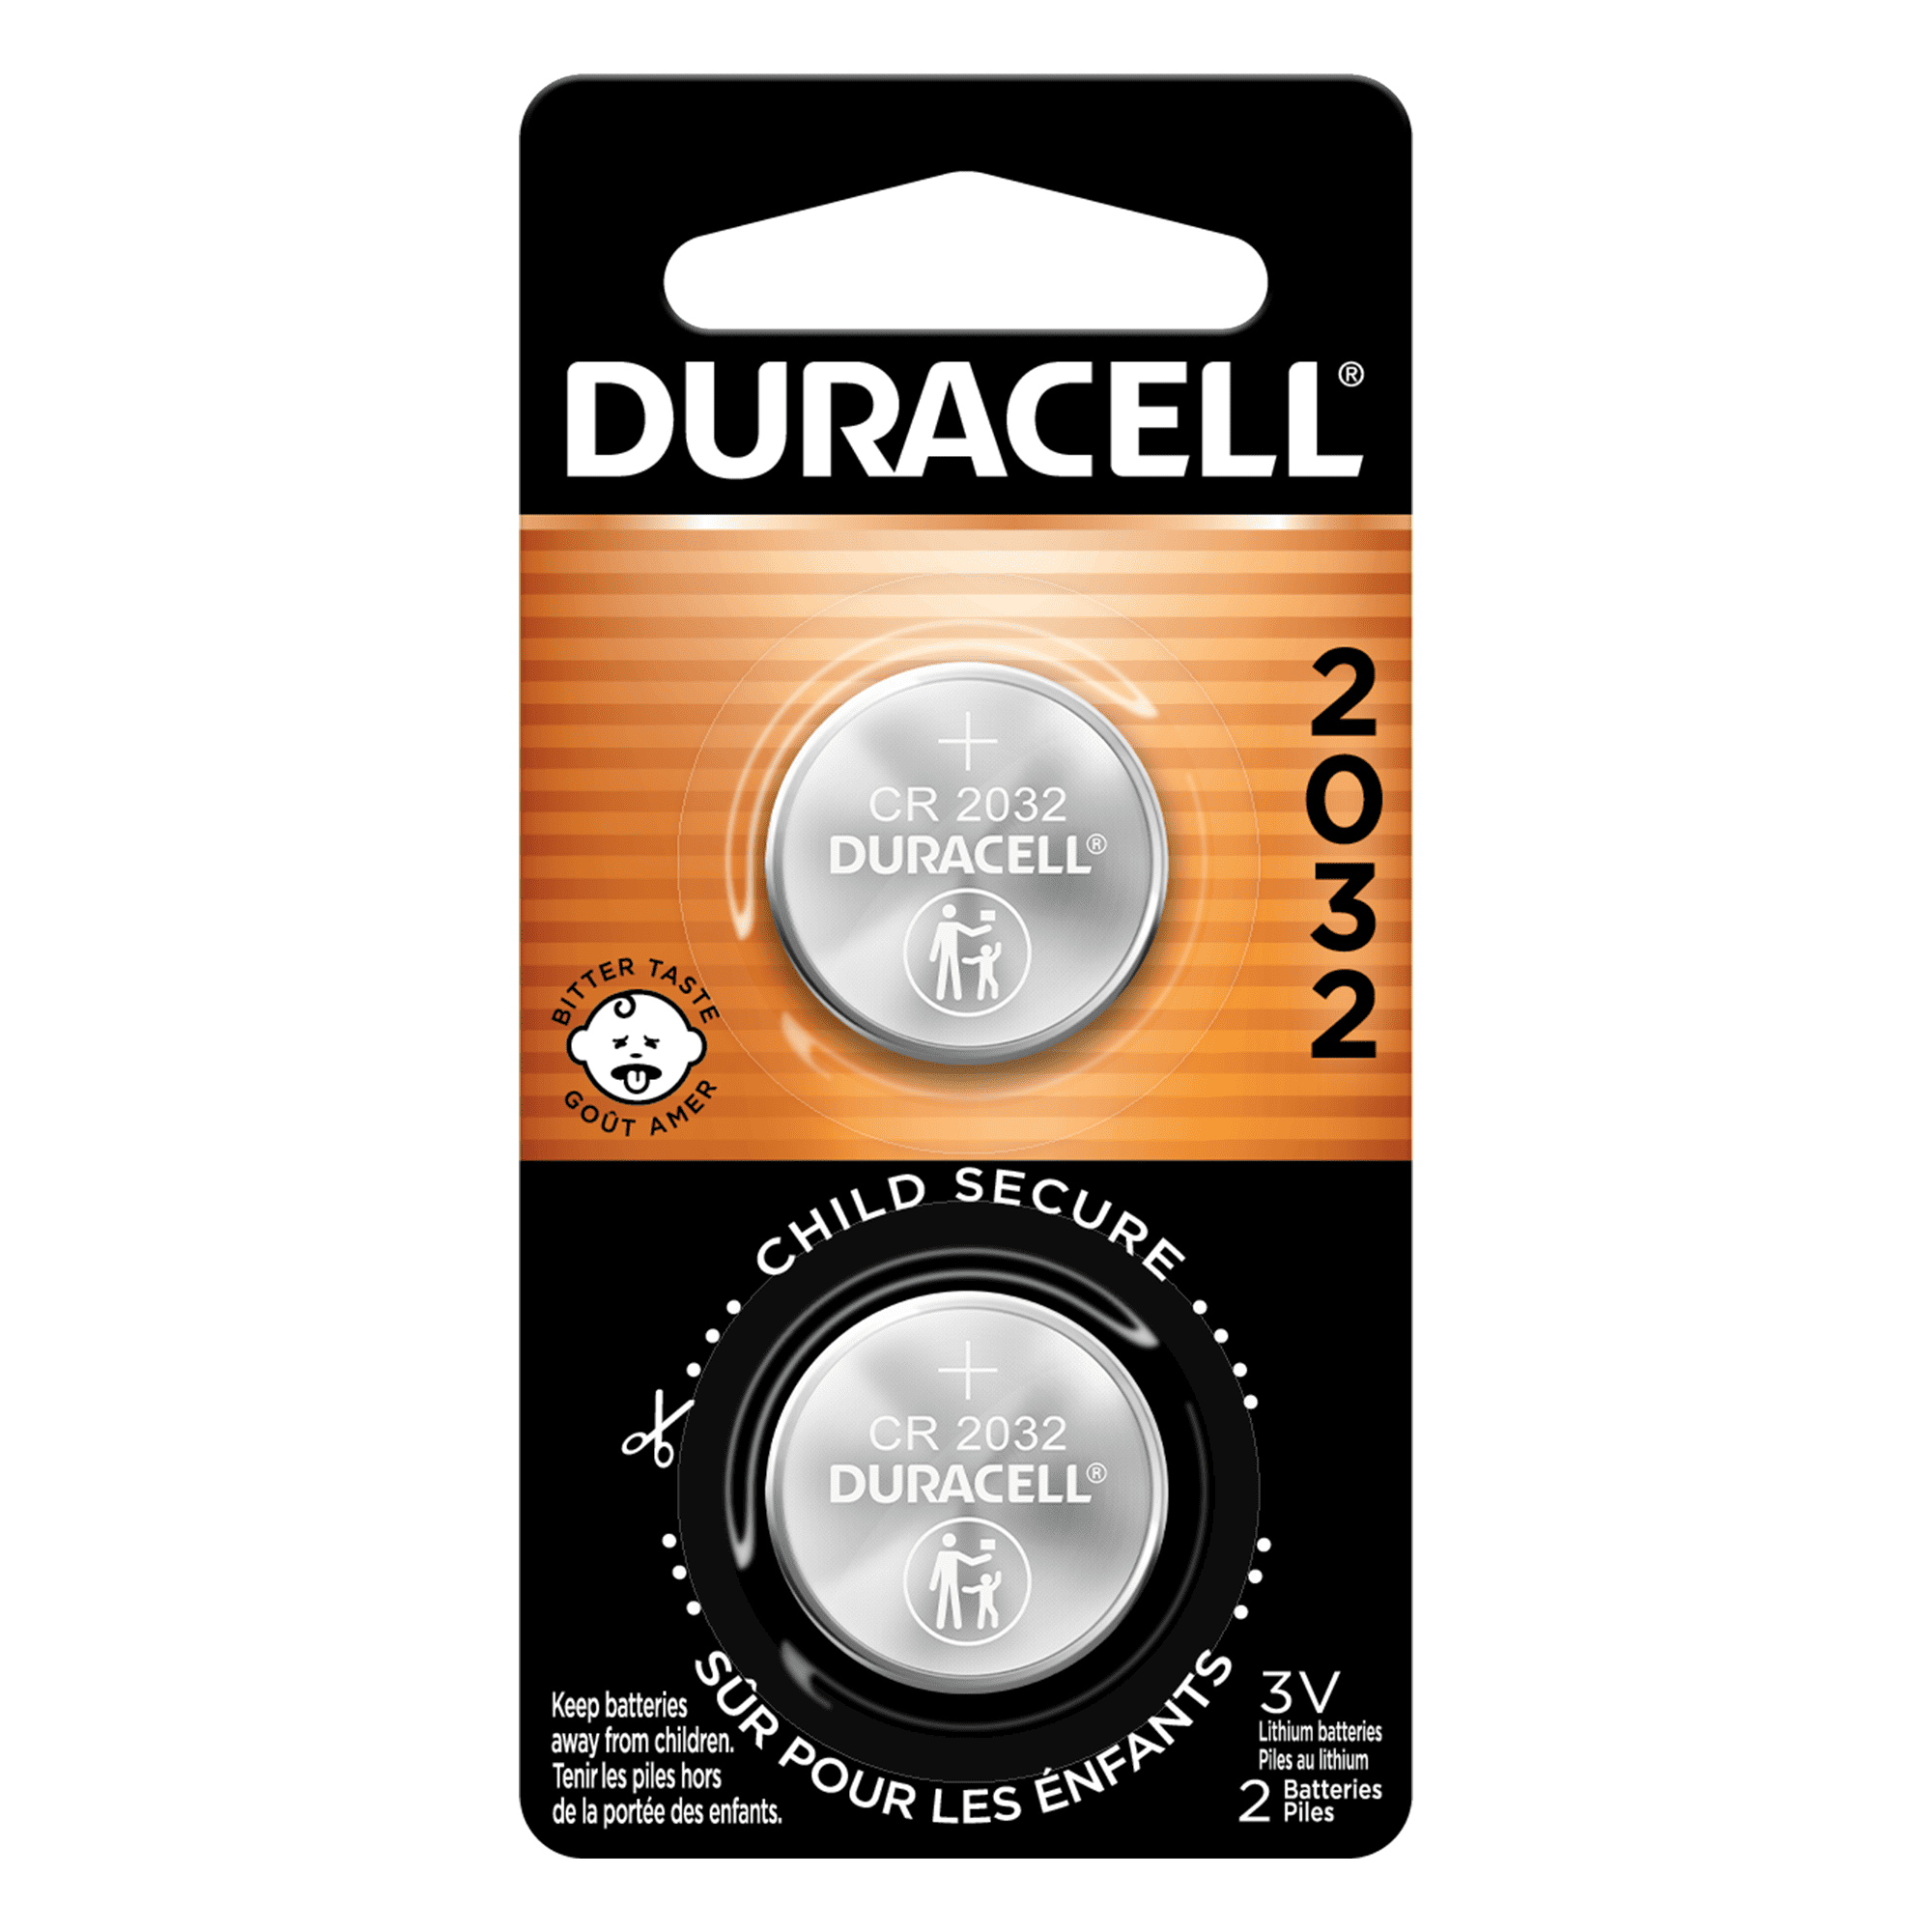 Apple Airtag Battery Duracell CR2032 Lithium coin cell battery 3V (2 pack)